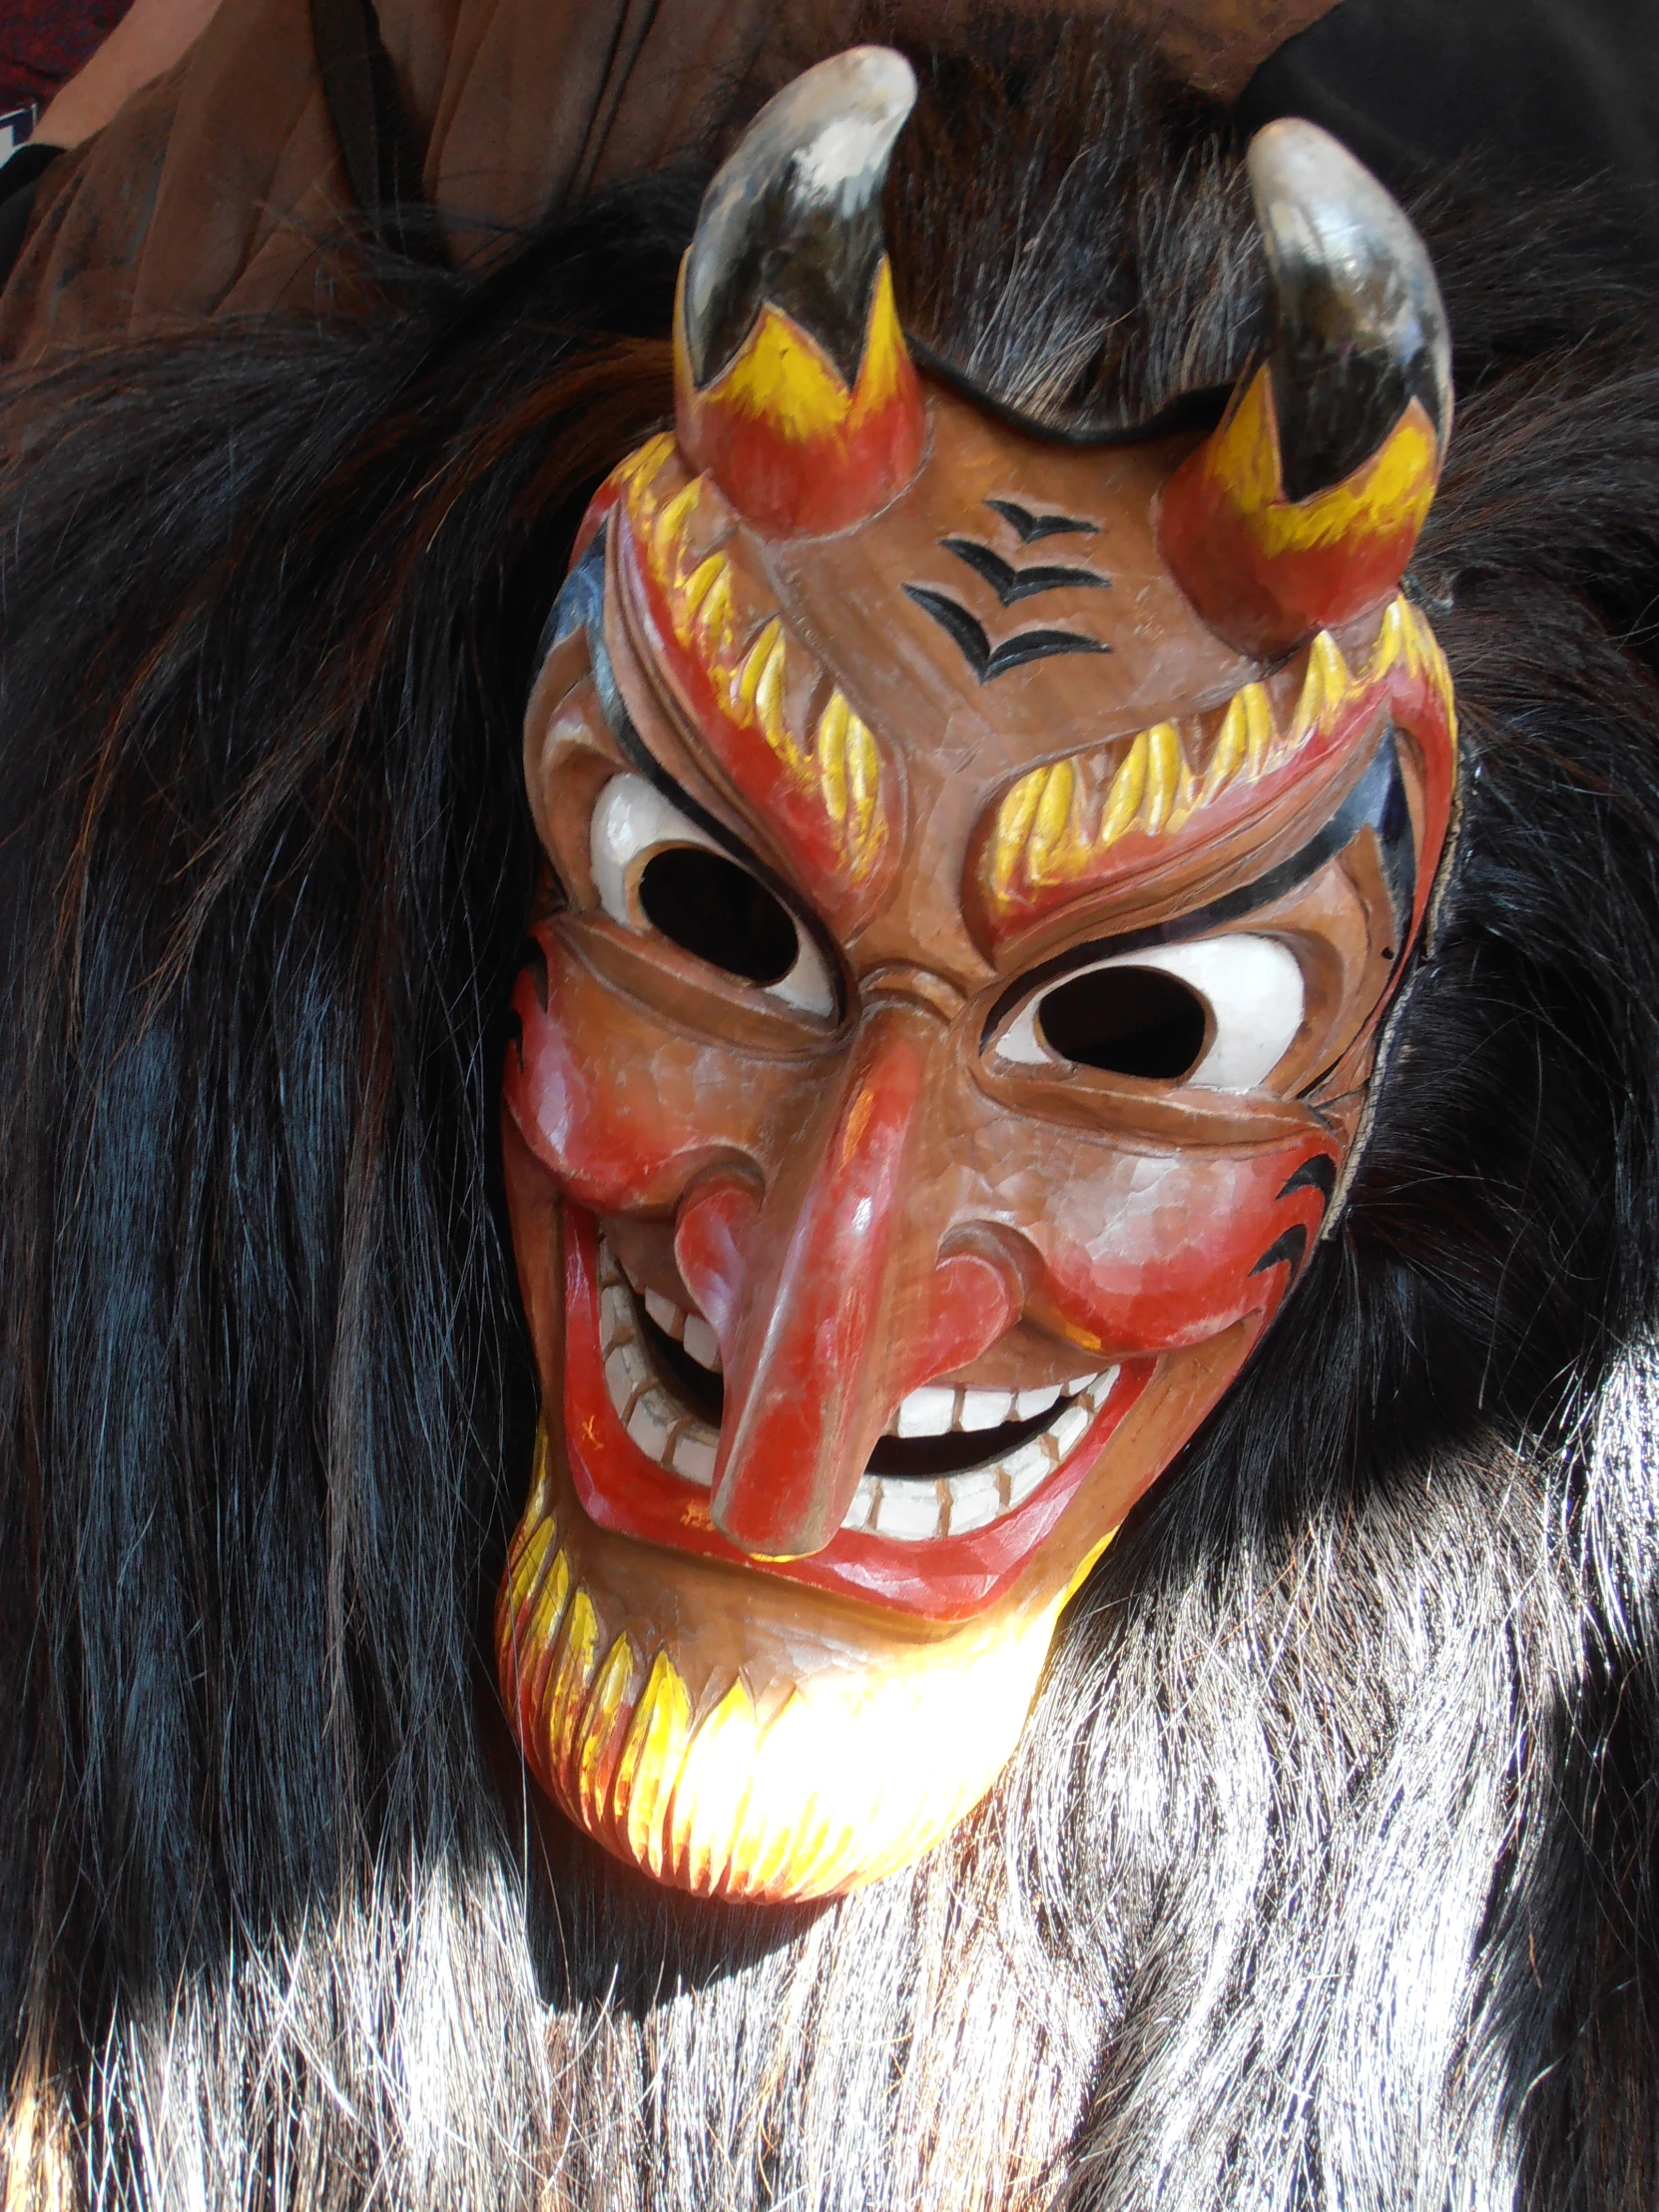 a scary mask is wearing fur in a costume